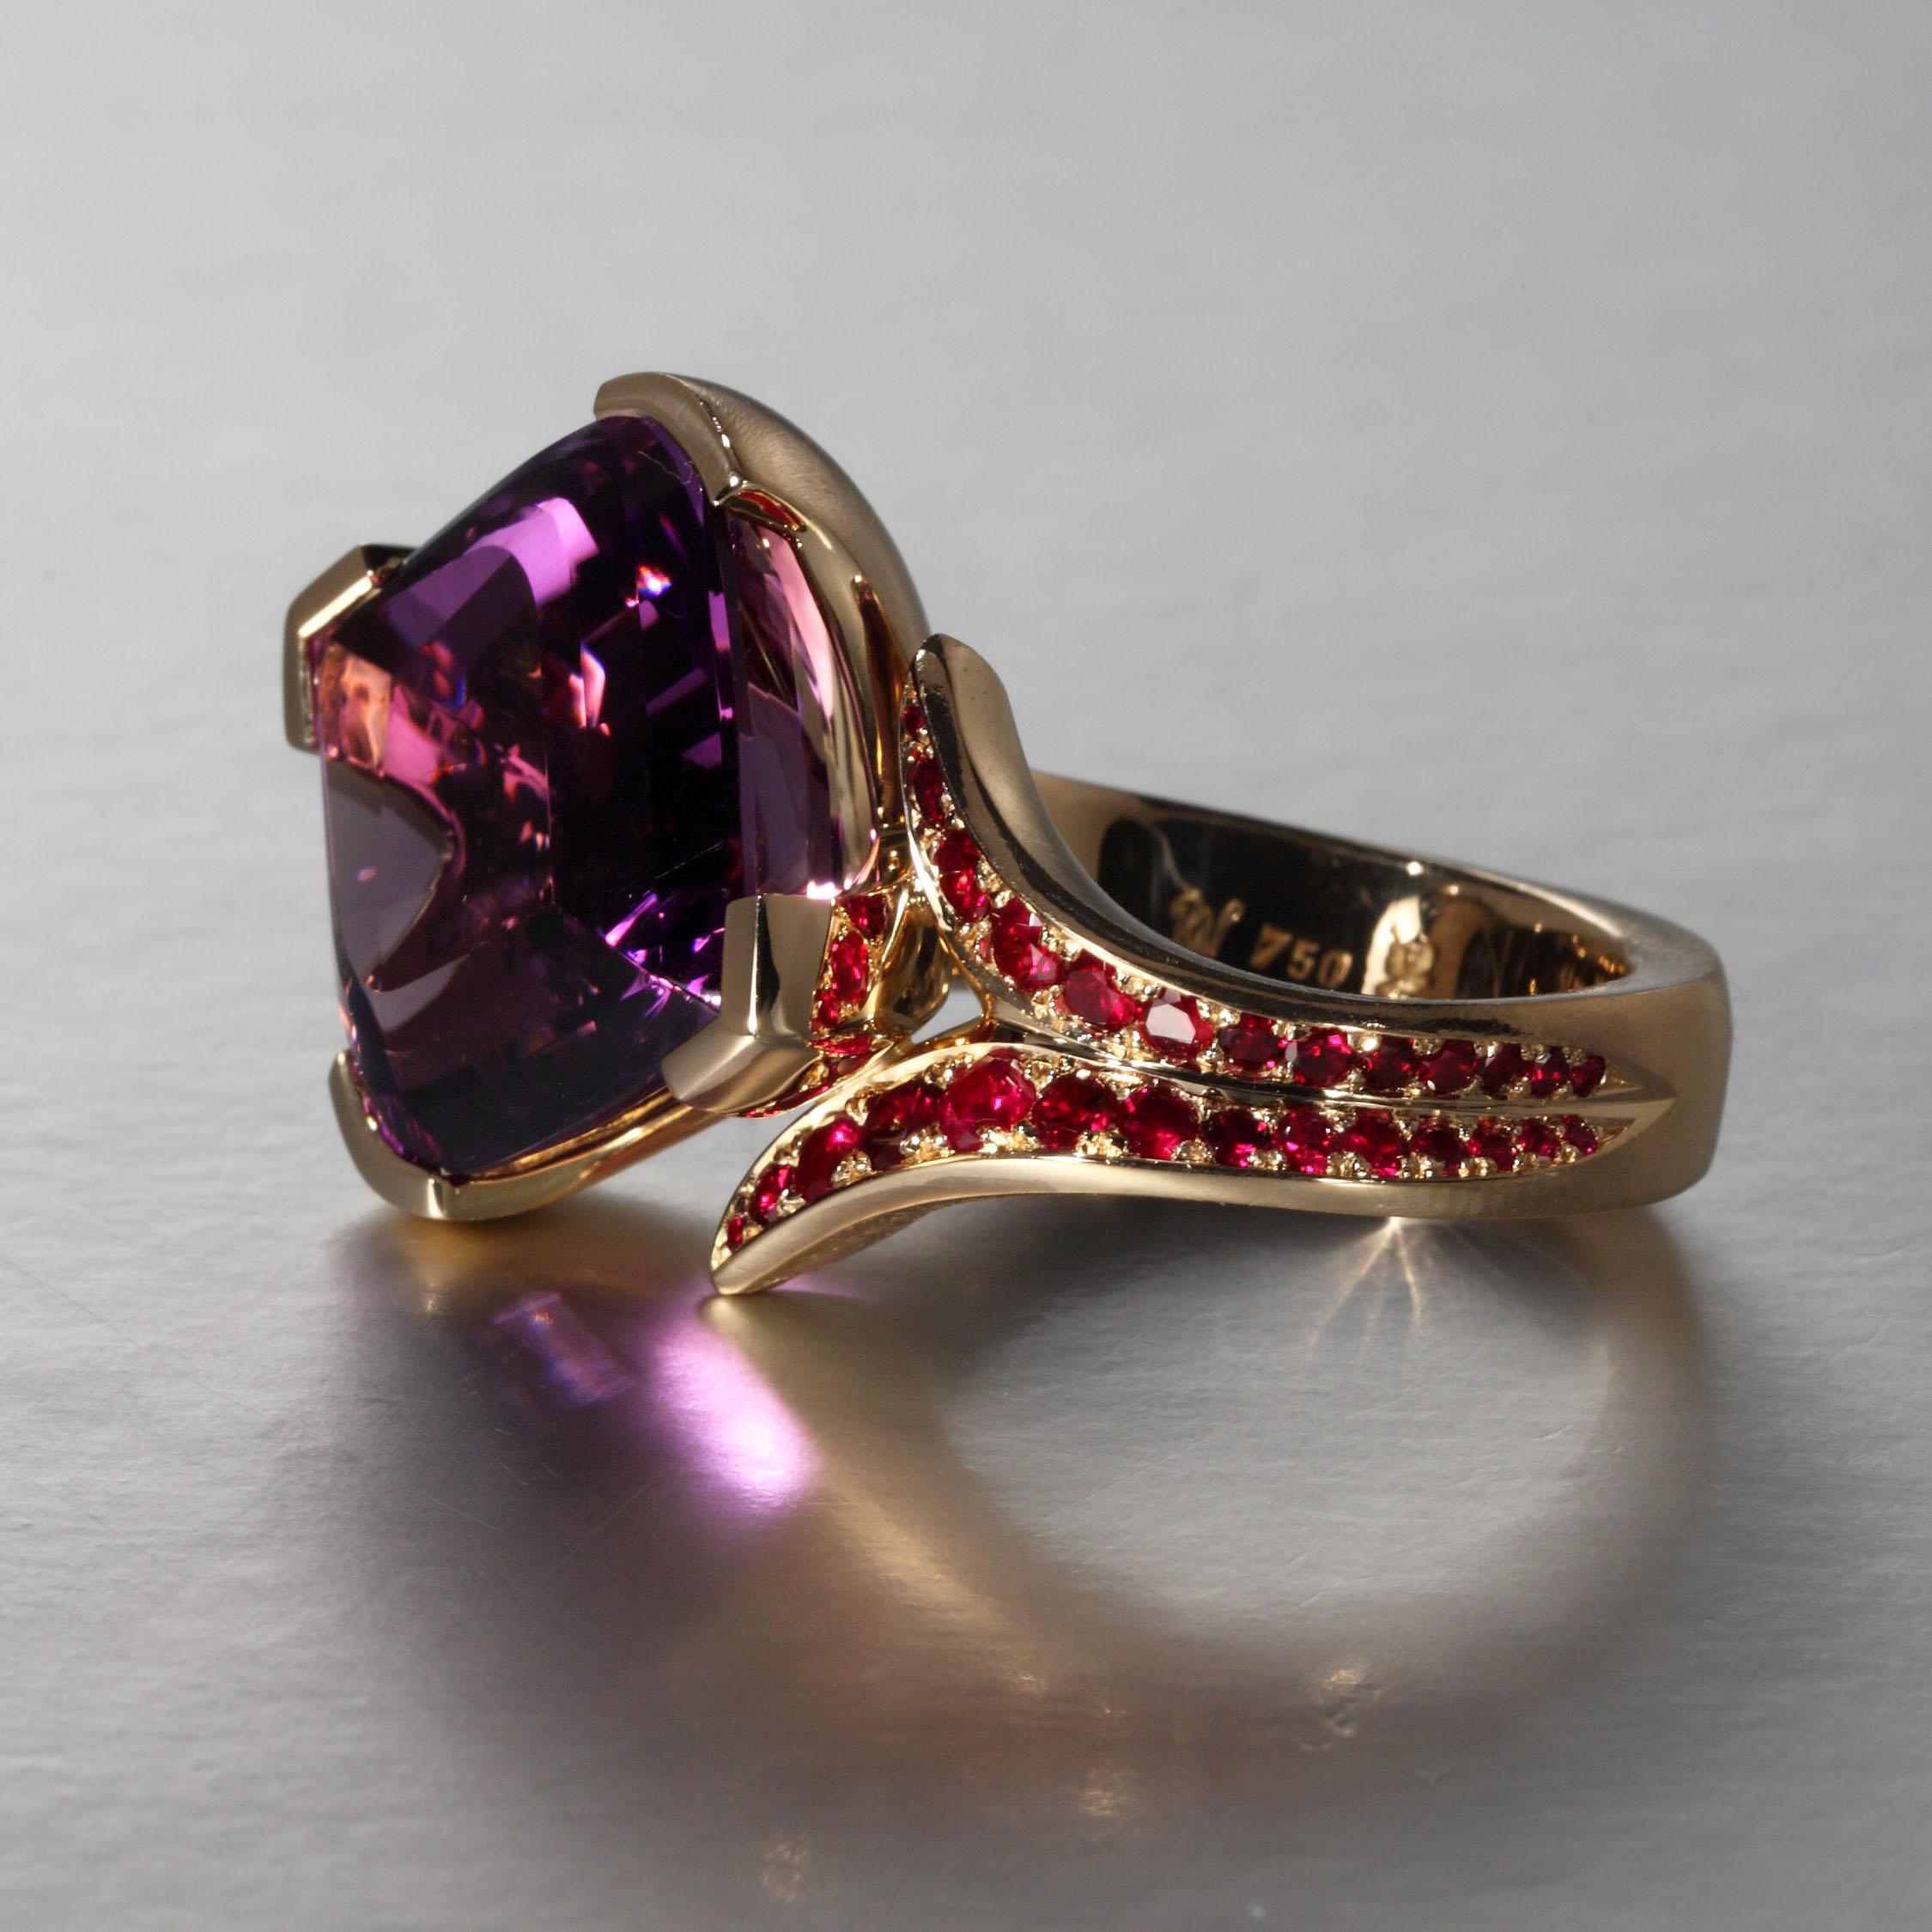 This 20.24 carat amethyst is mounted with 0.83 carat rubies in a rose gold ring with a matt finish. This one of a kind piece is designed and hand made (mounted and lost wax casting) in Zurich, Switzerland by Robert Vogelsang and signed RV.

It is